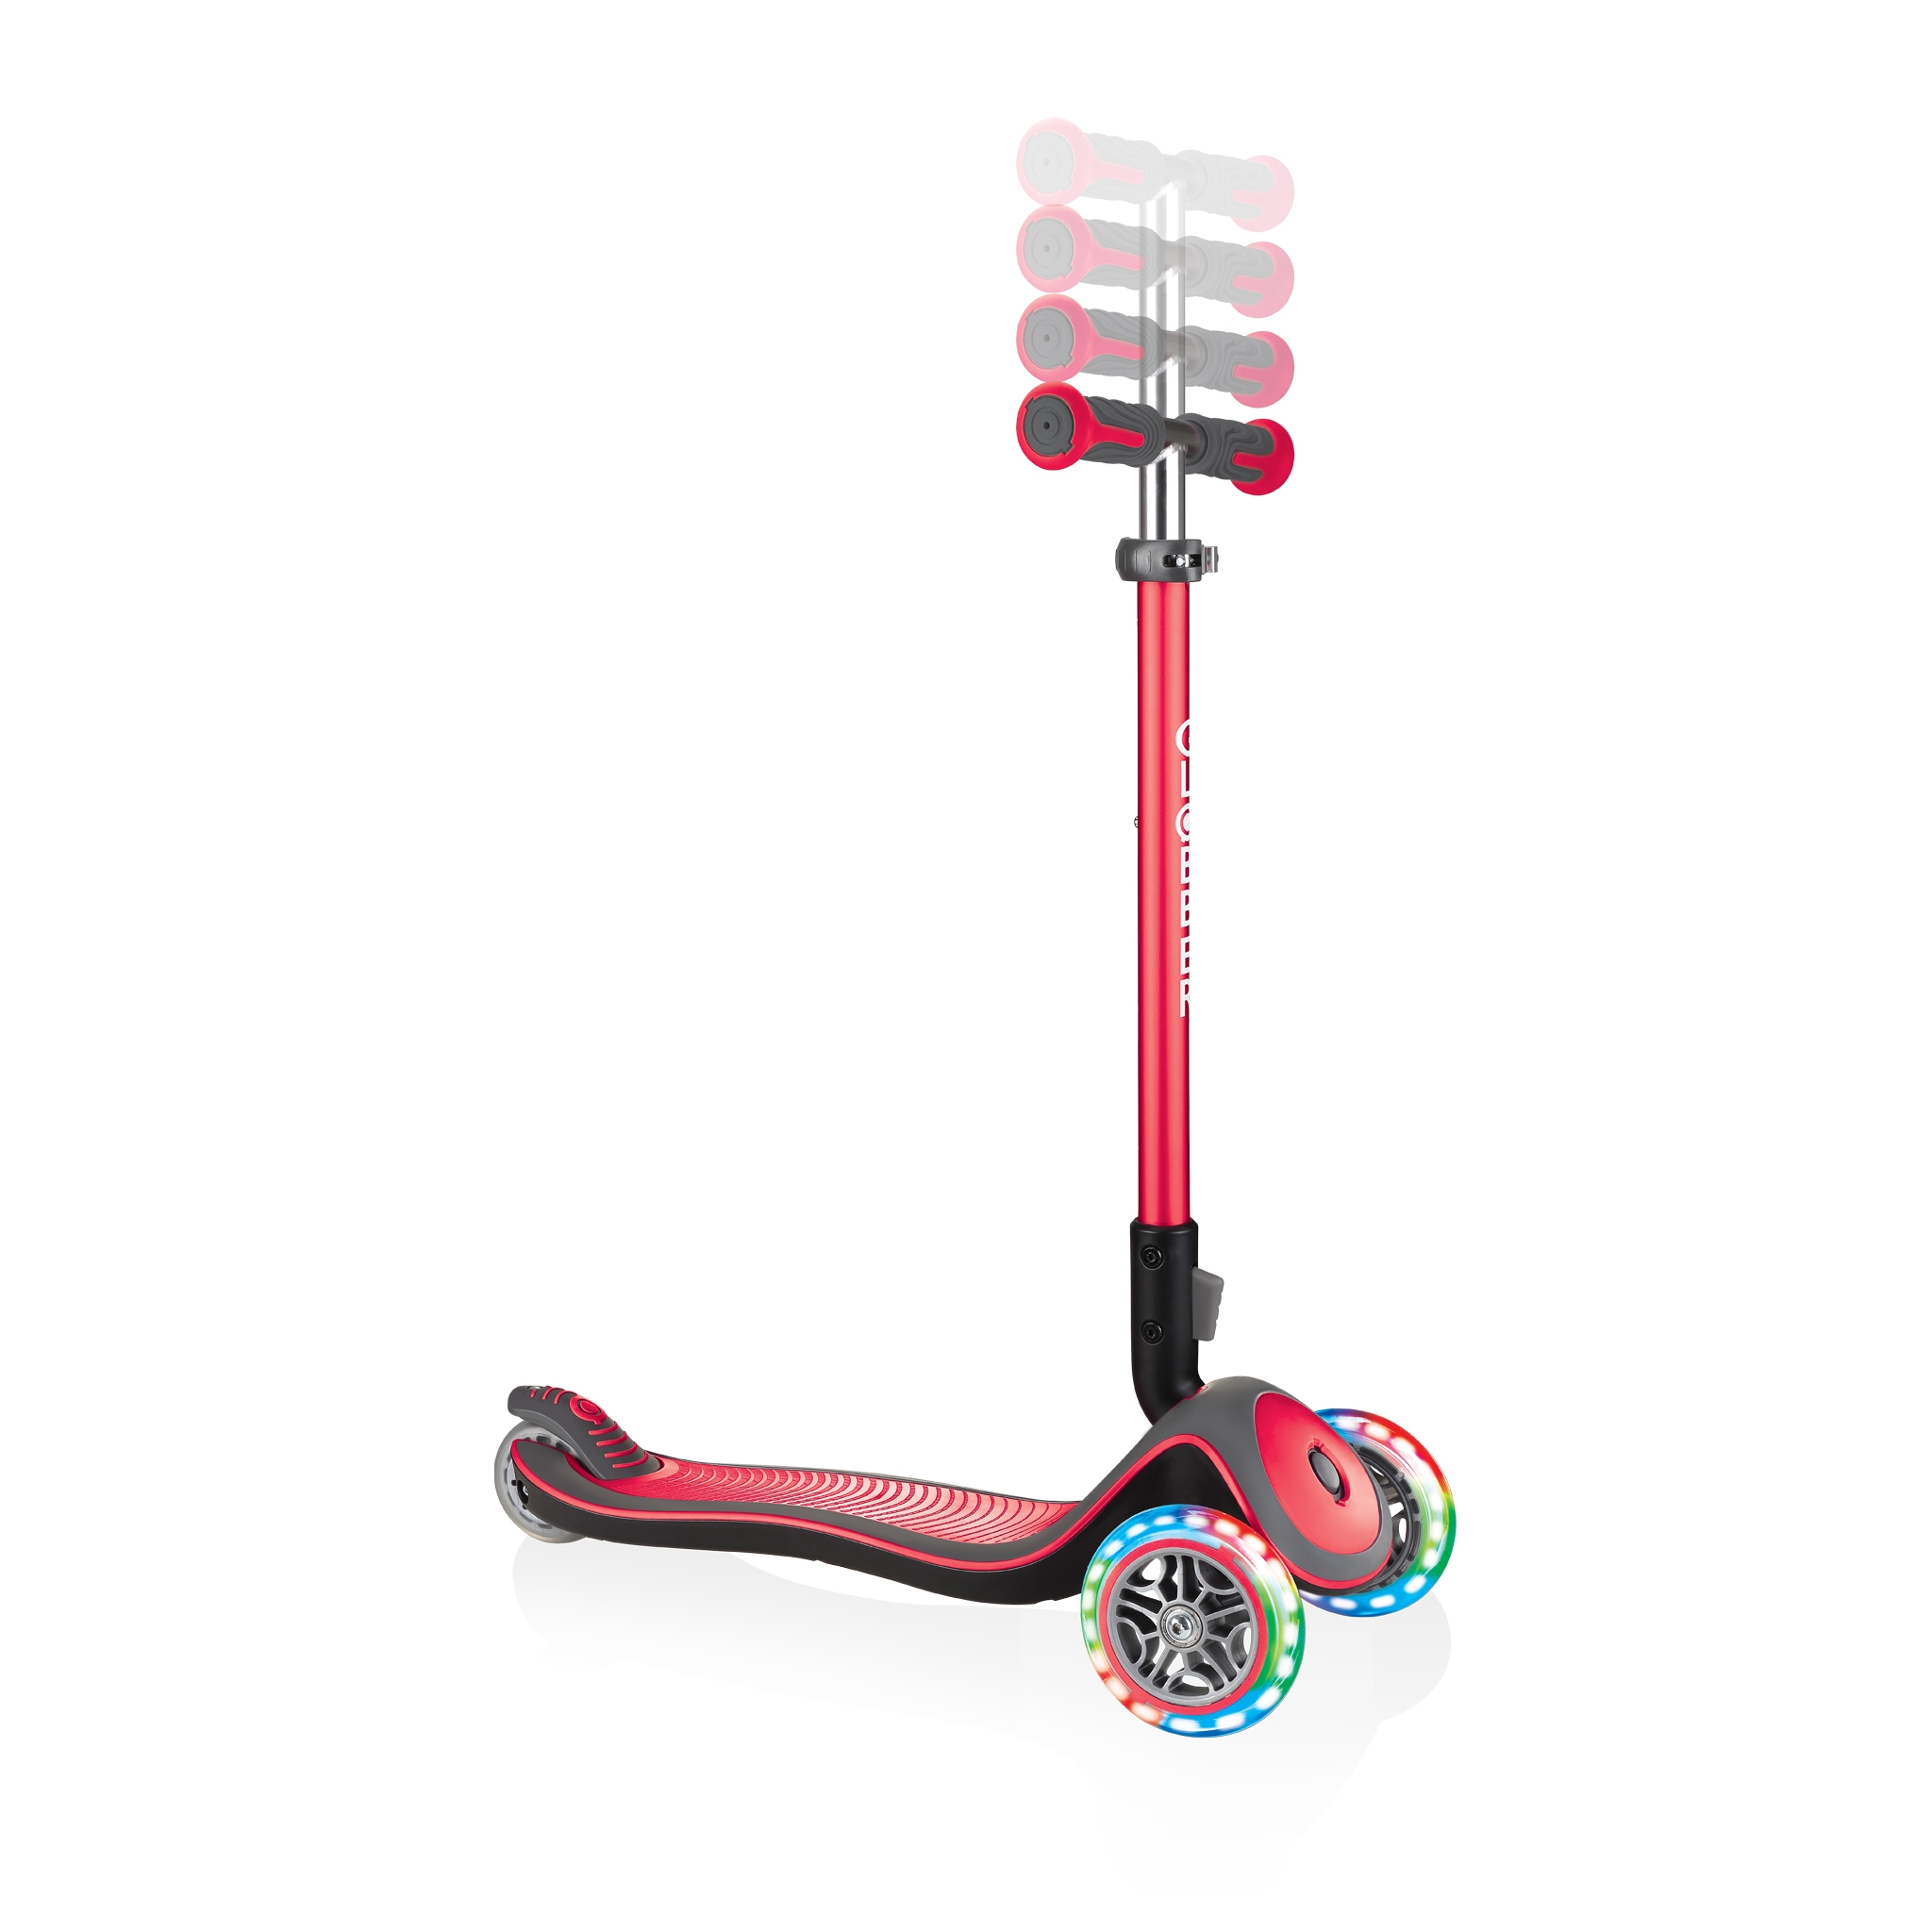 Globber-ELITE-DELUXE-LIGHTS-3-wheel-adjustable-scooter-for-kids-with-light-up-scooter-wheels-new-red 1